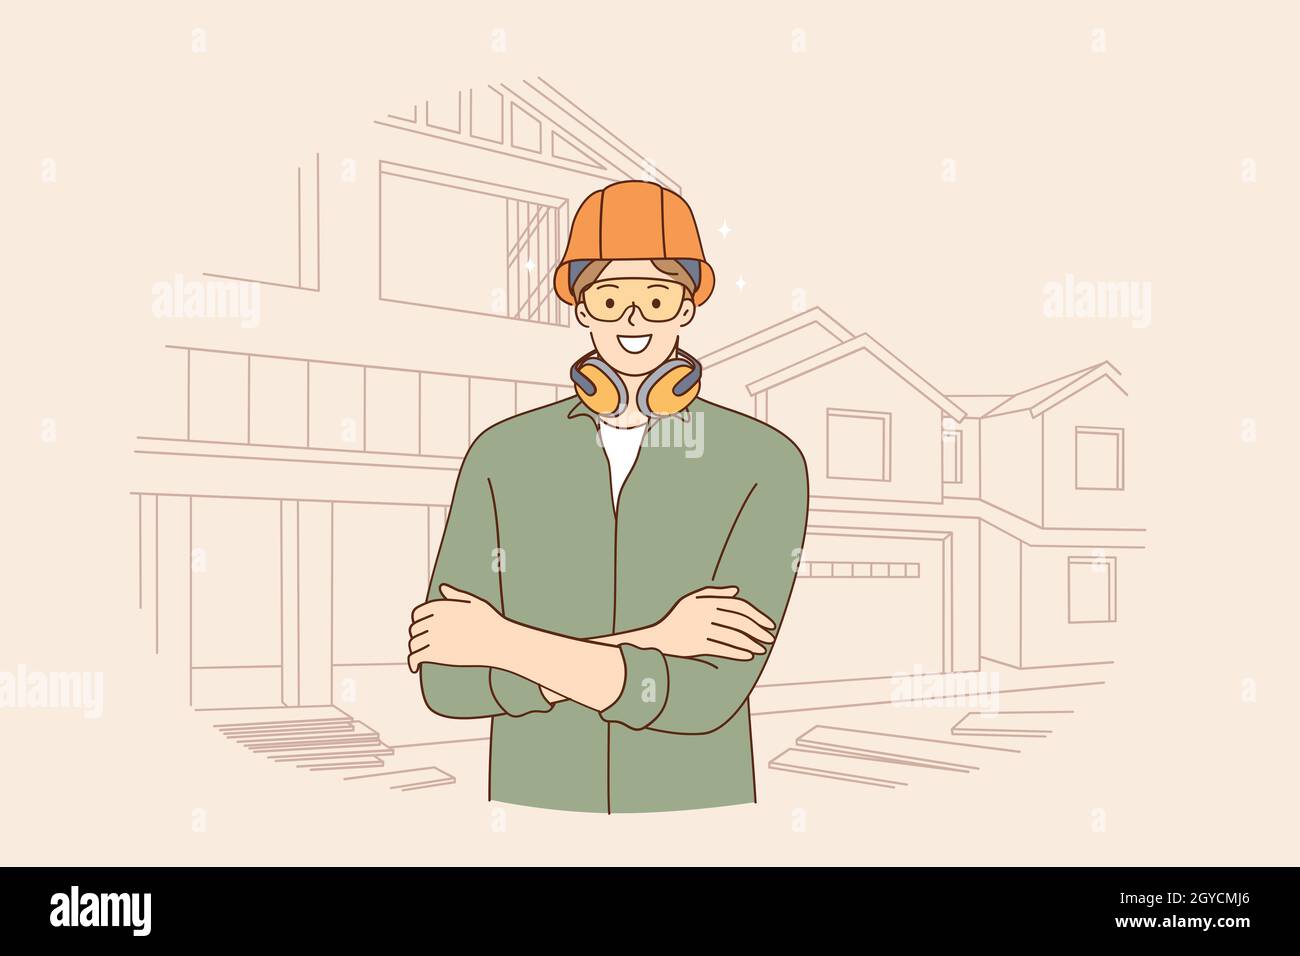 Male engineers during work concept. Young smiling positive businessman construction site engineer cartoon character in helmet and work uniform standin Stock Photo